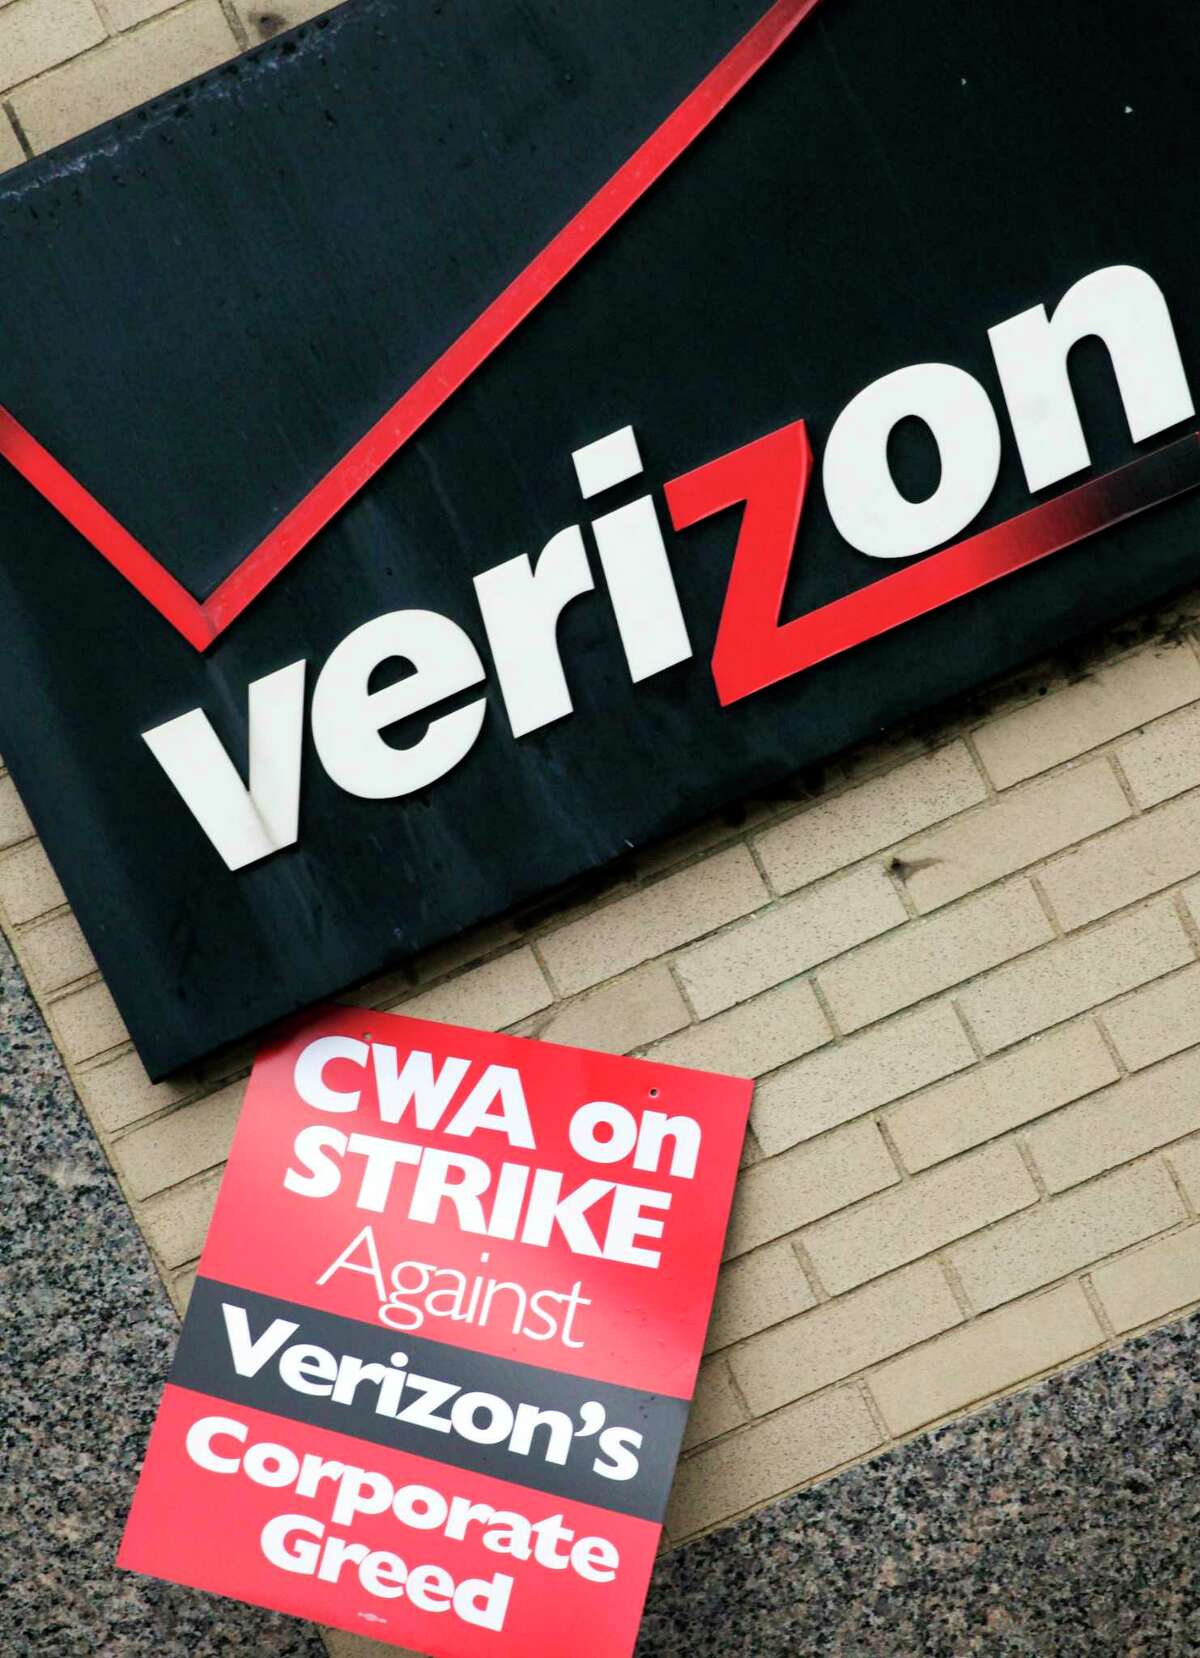 A contract covering 39,000 Verizon workers represented by two unions expired at the end of Saturday, Aug. 1.